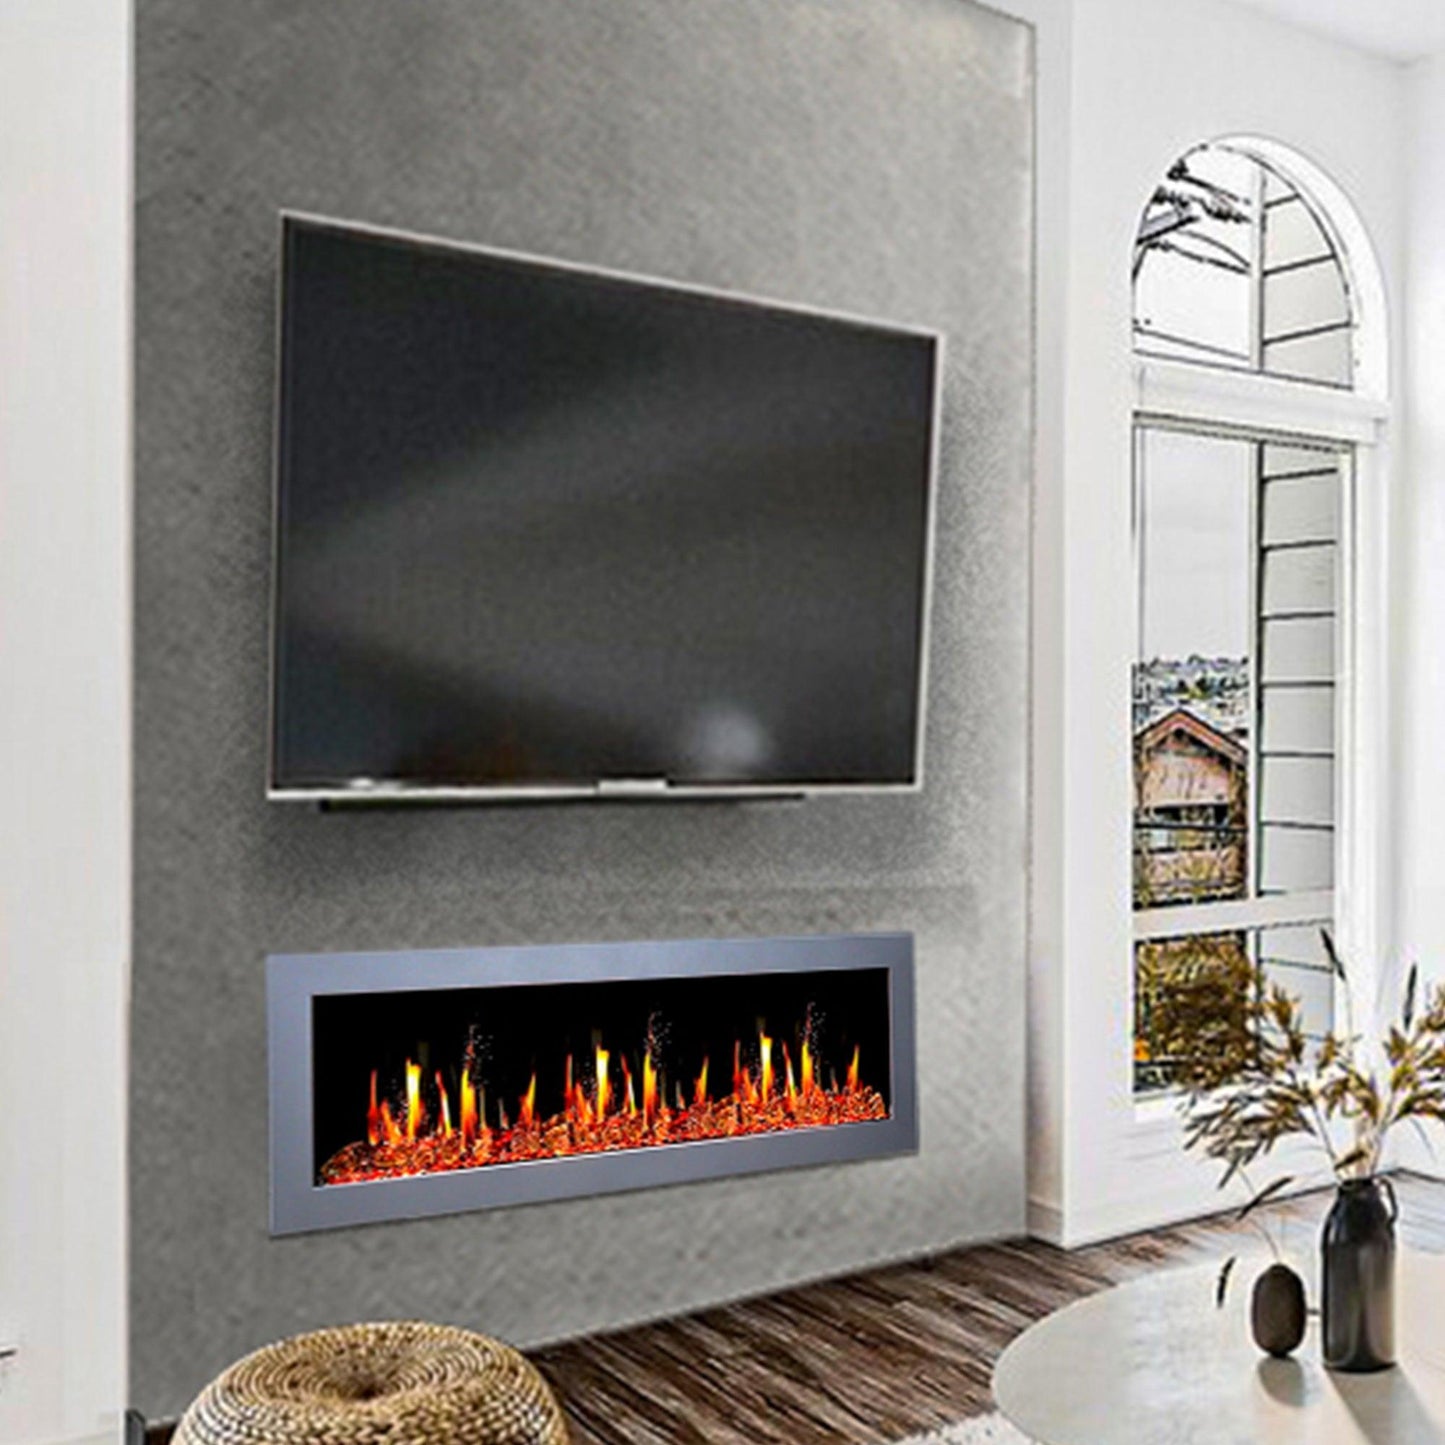 ZopaFlame™ 58" Linear Wall-mount Electric Fireplace - SG19588V - ZopaFlame Fireplaces